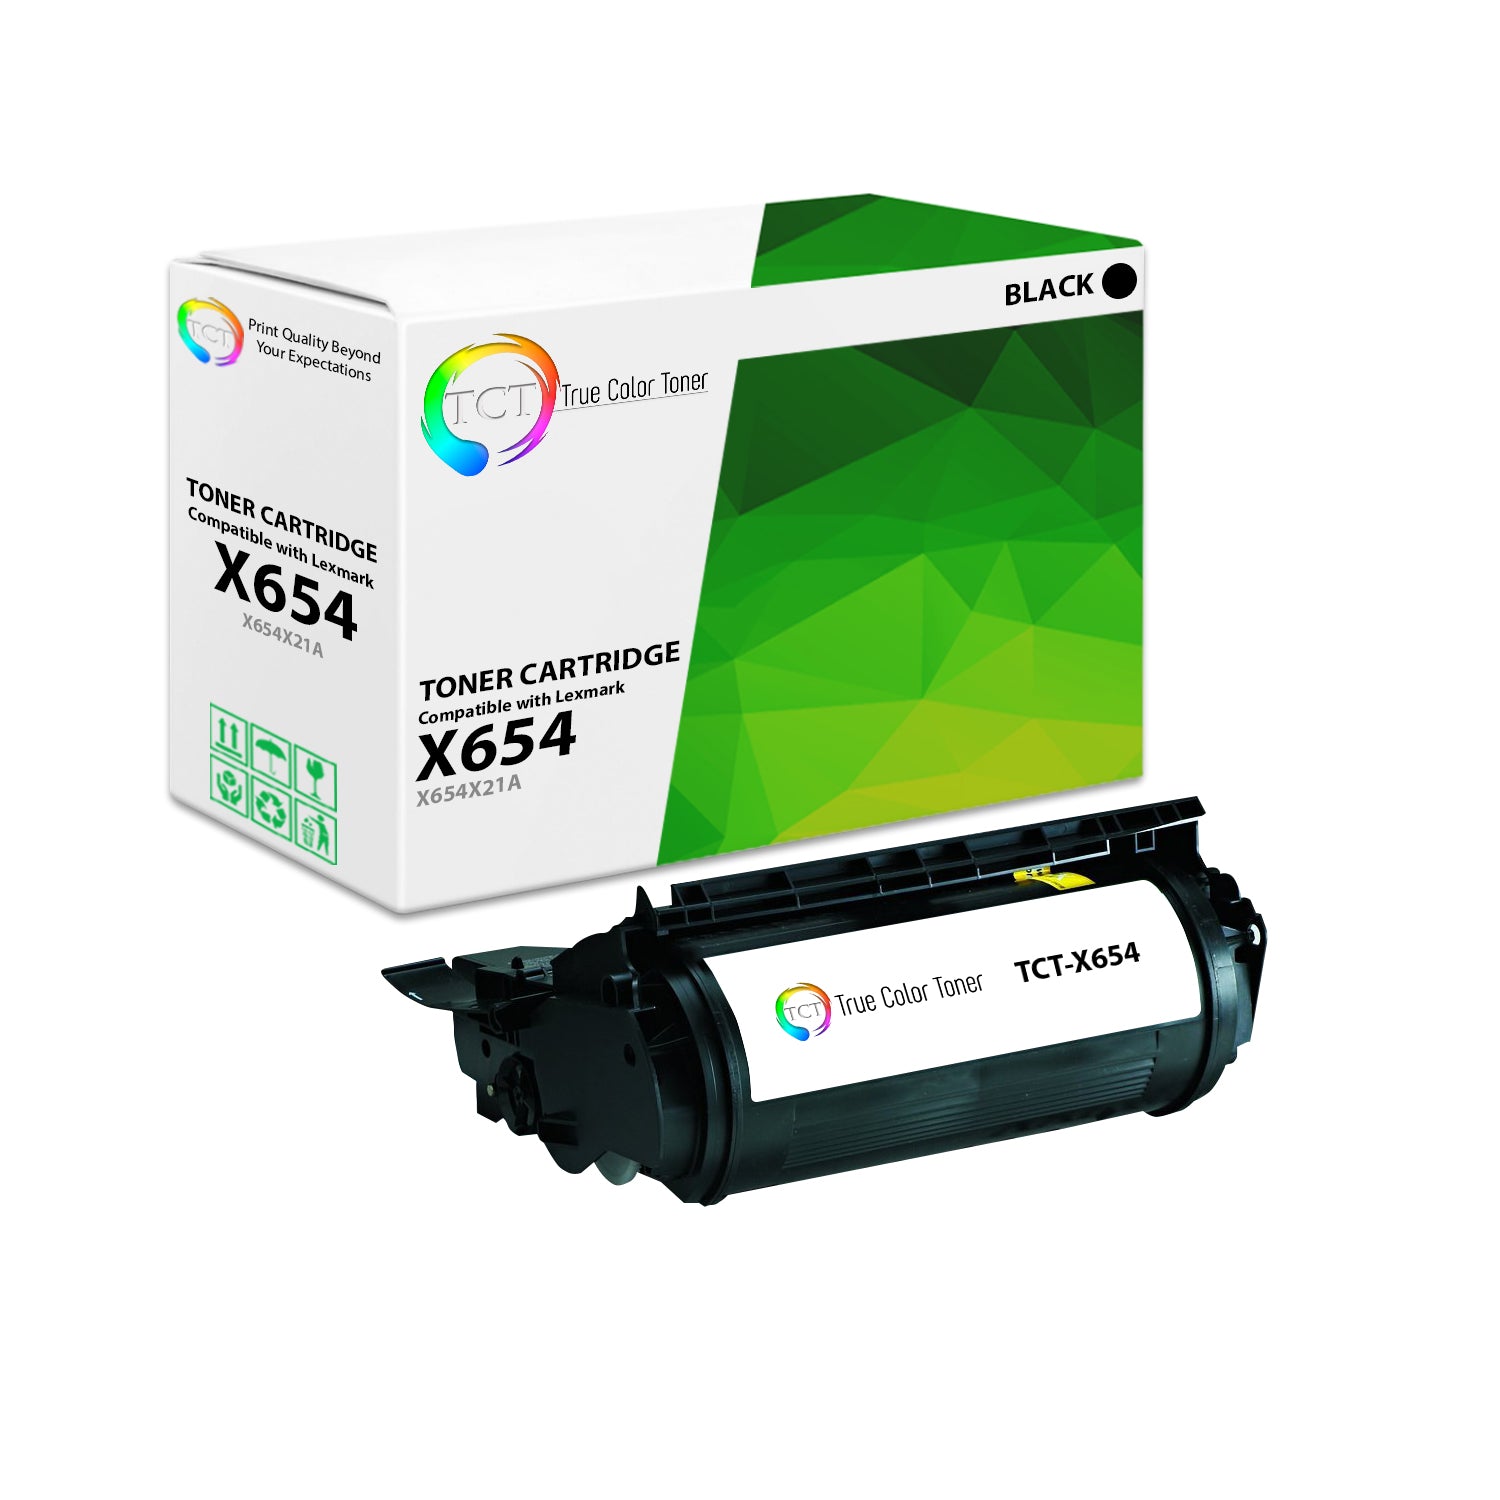 TCT Remanufactured Extra HY Toner Cartridge Replacement for the Lexmark X654 Series - 1 Pack Black